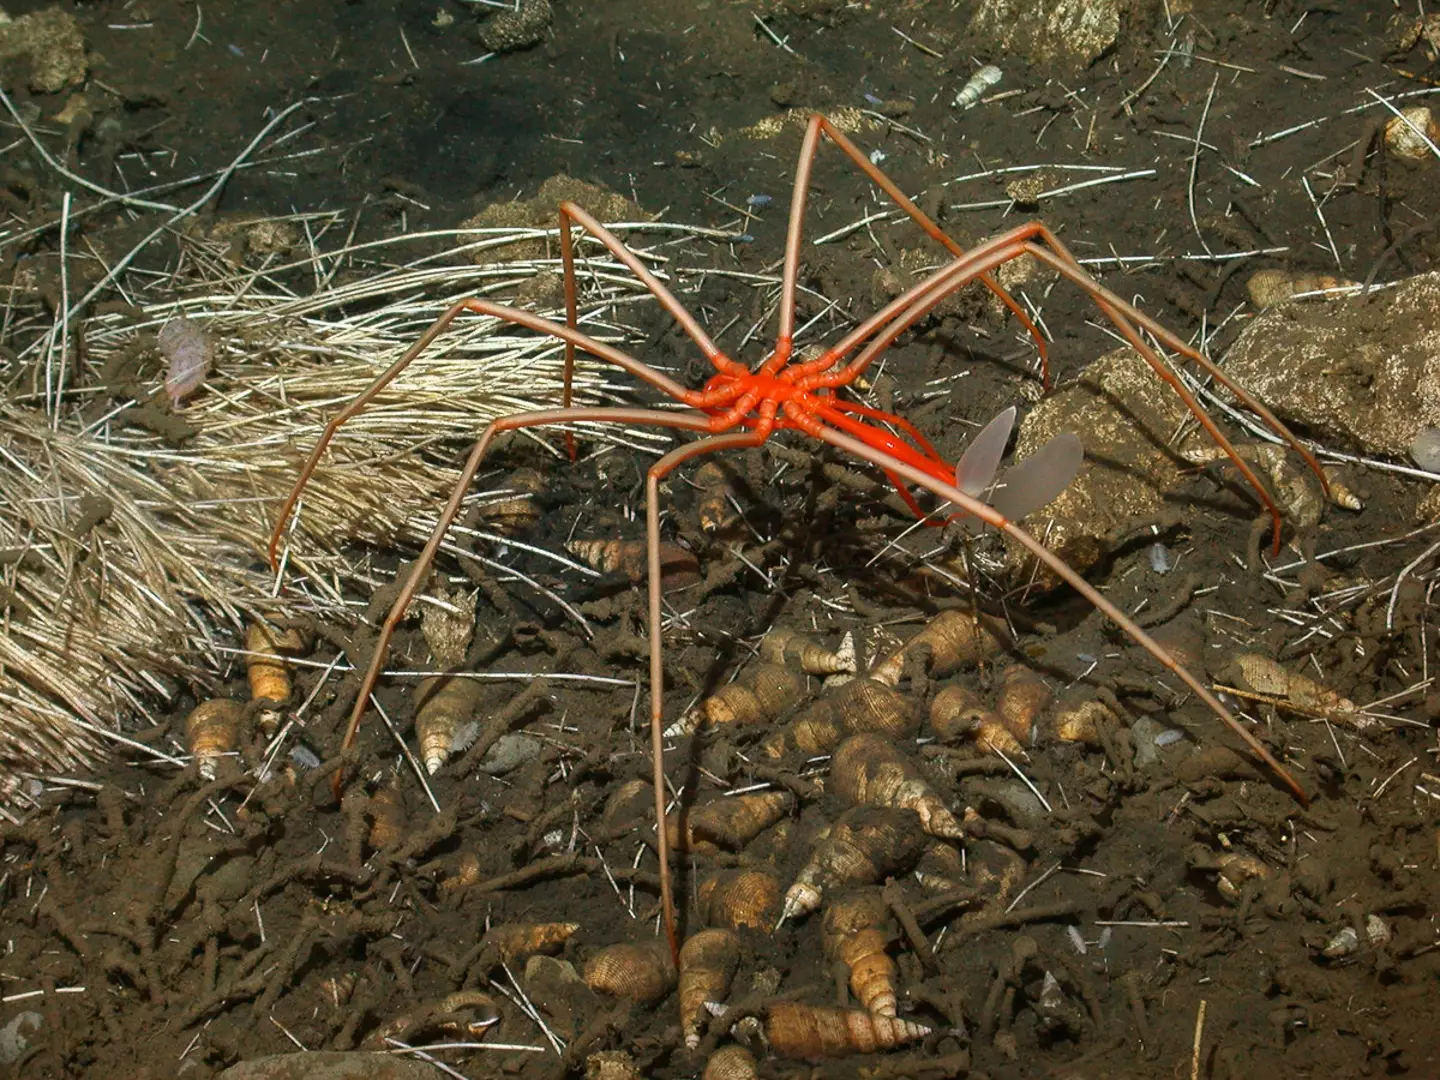 Researchers observed two spiders that appeared to be mating.